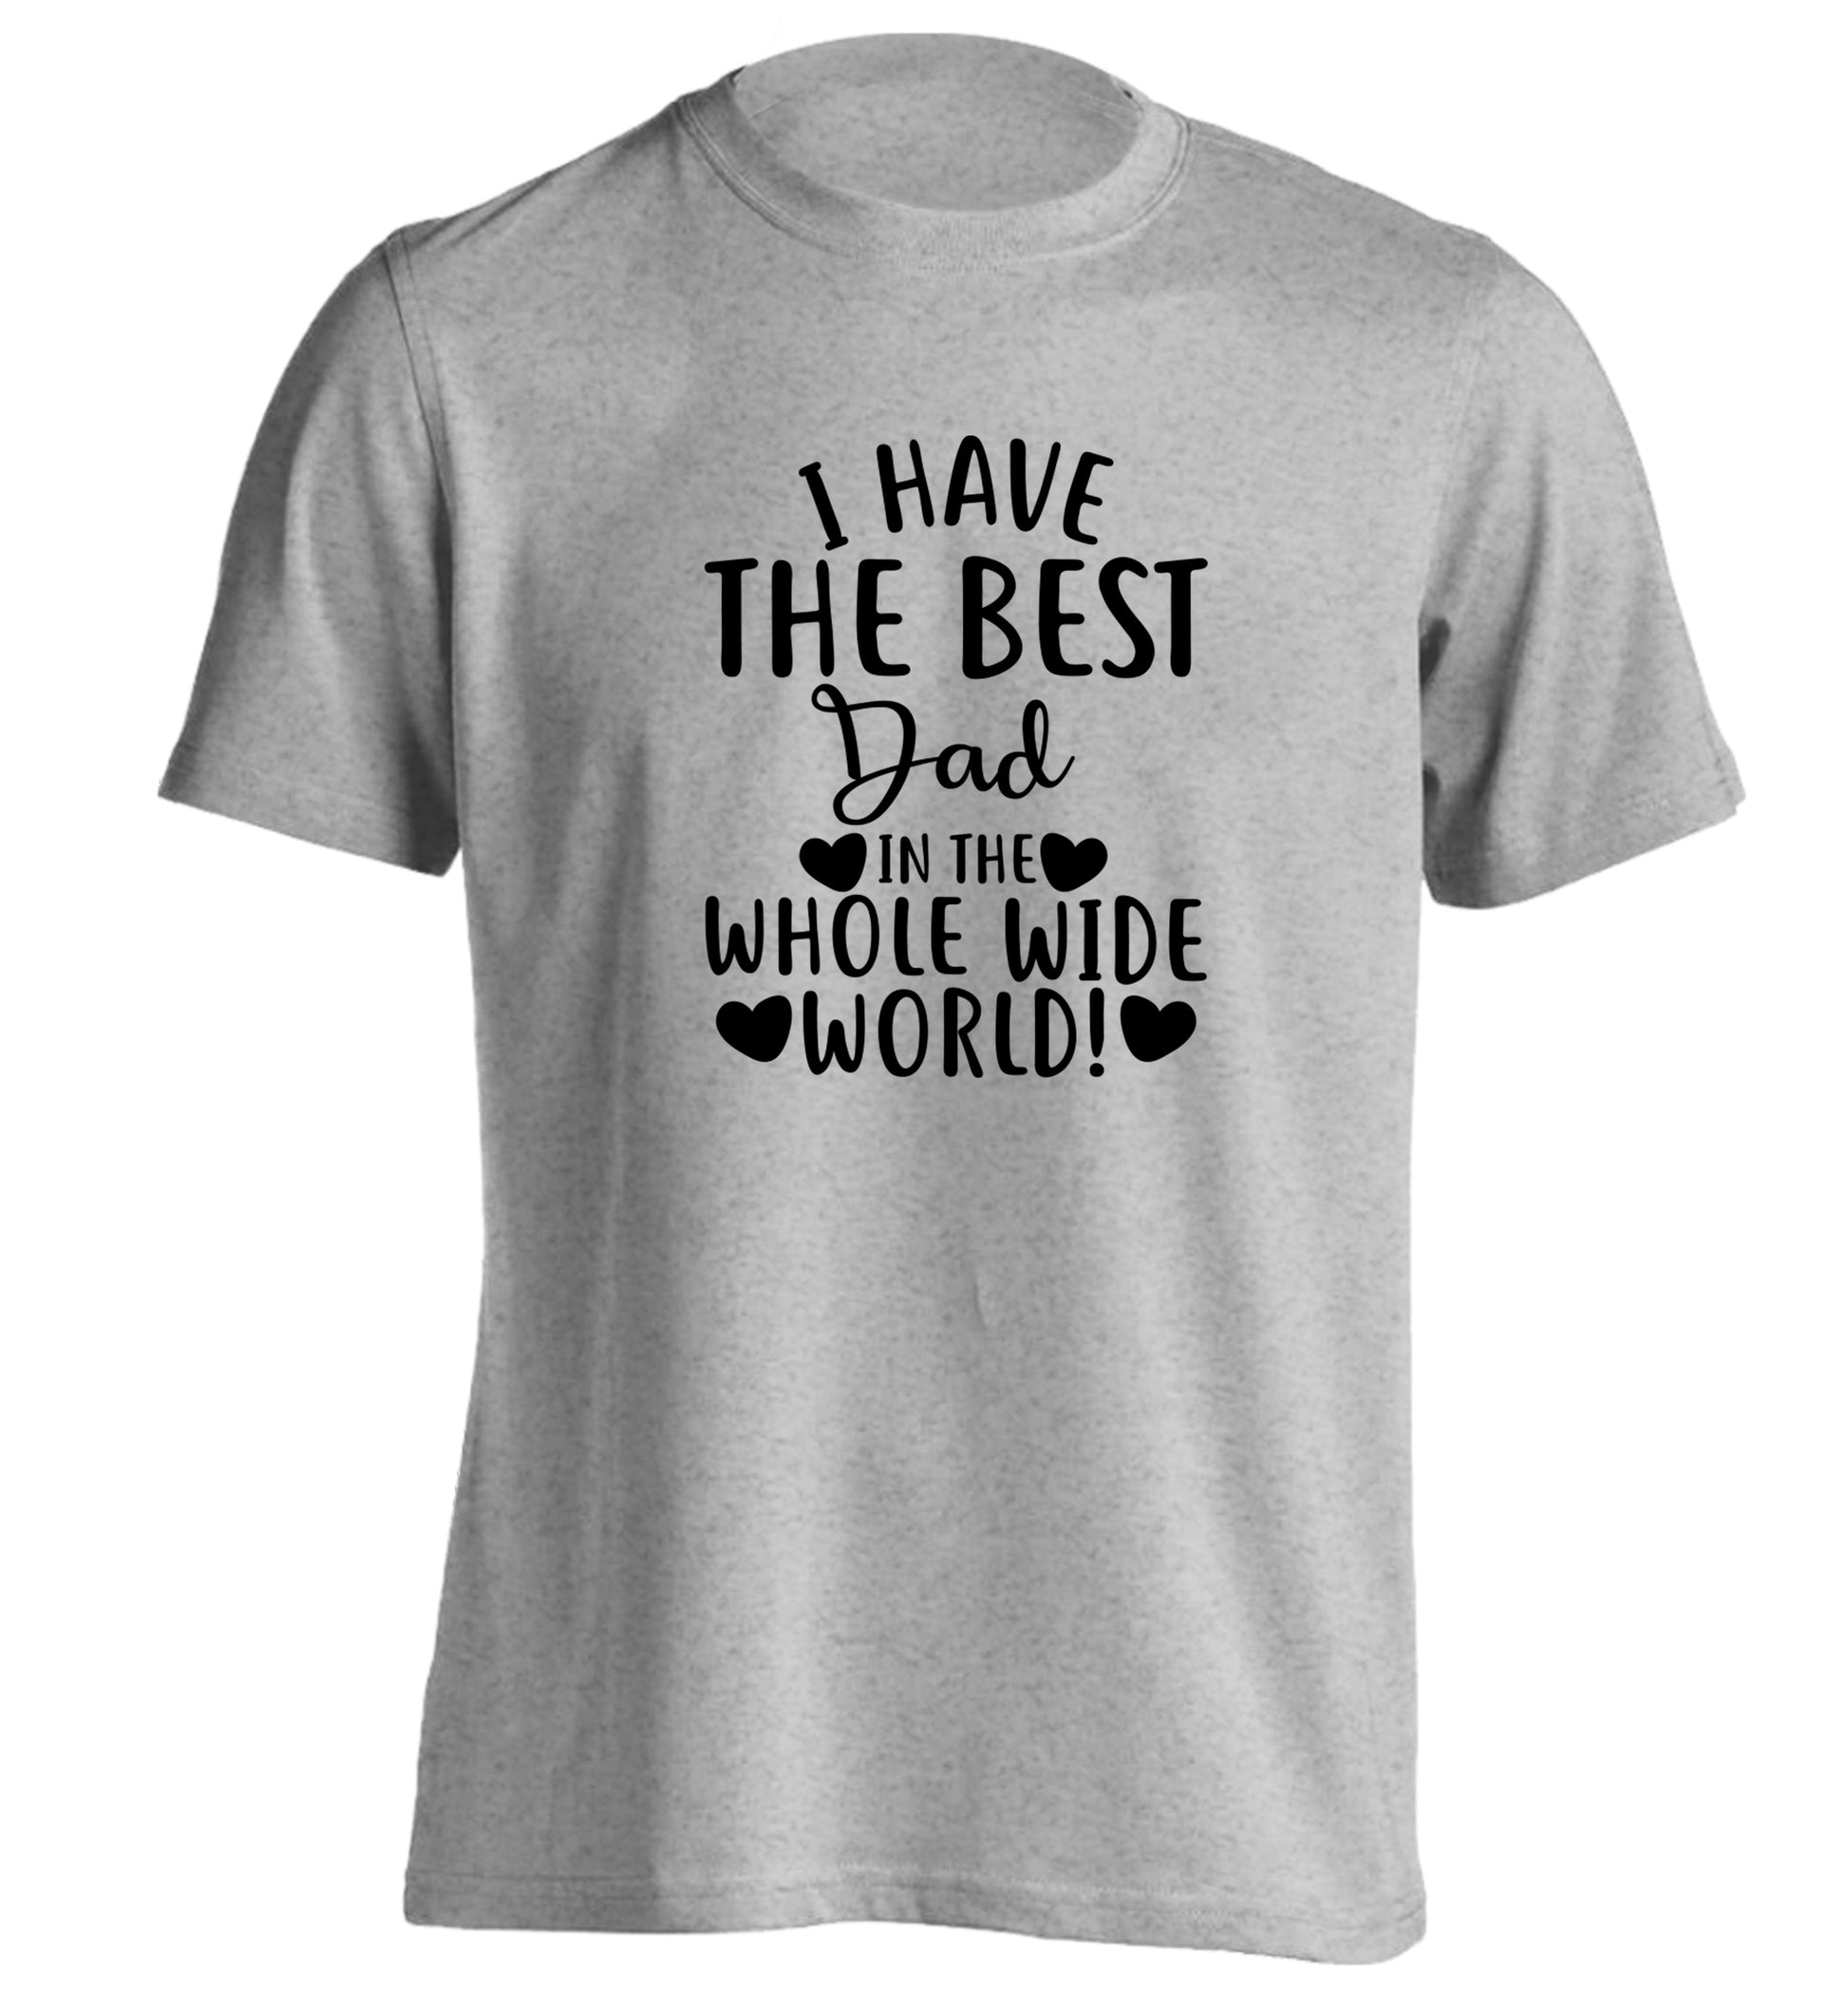 I have the best dad in the whole wide world! adults unisex grey Tshirt 2XL